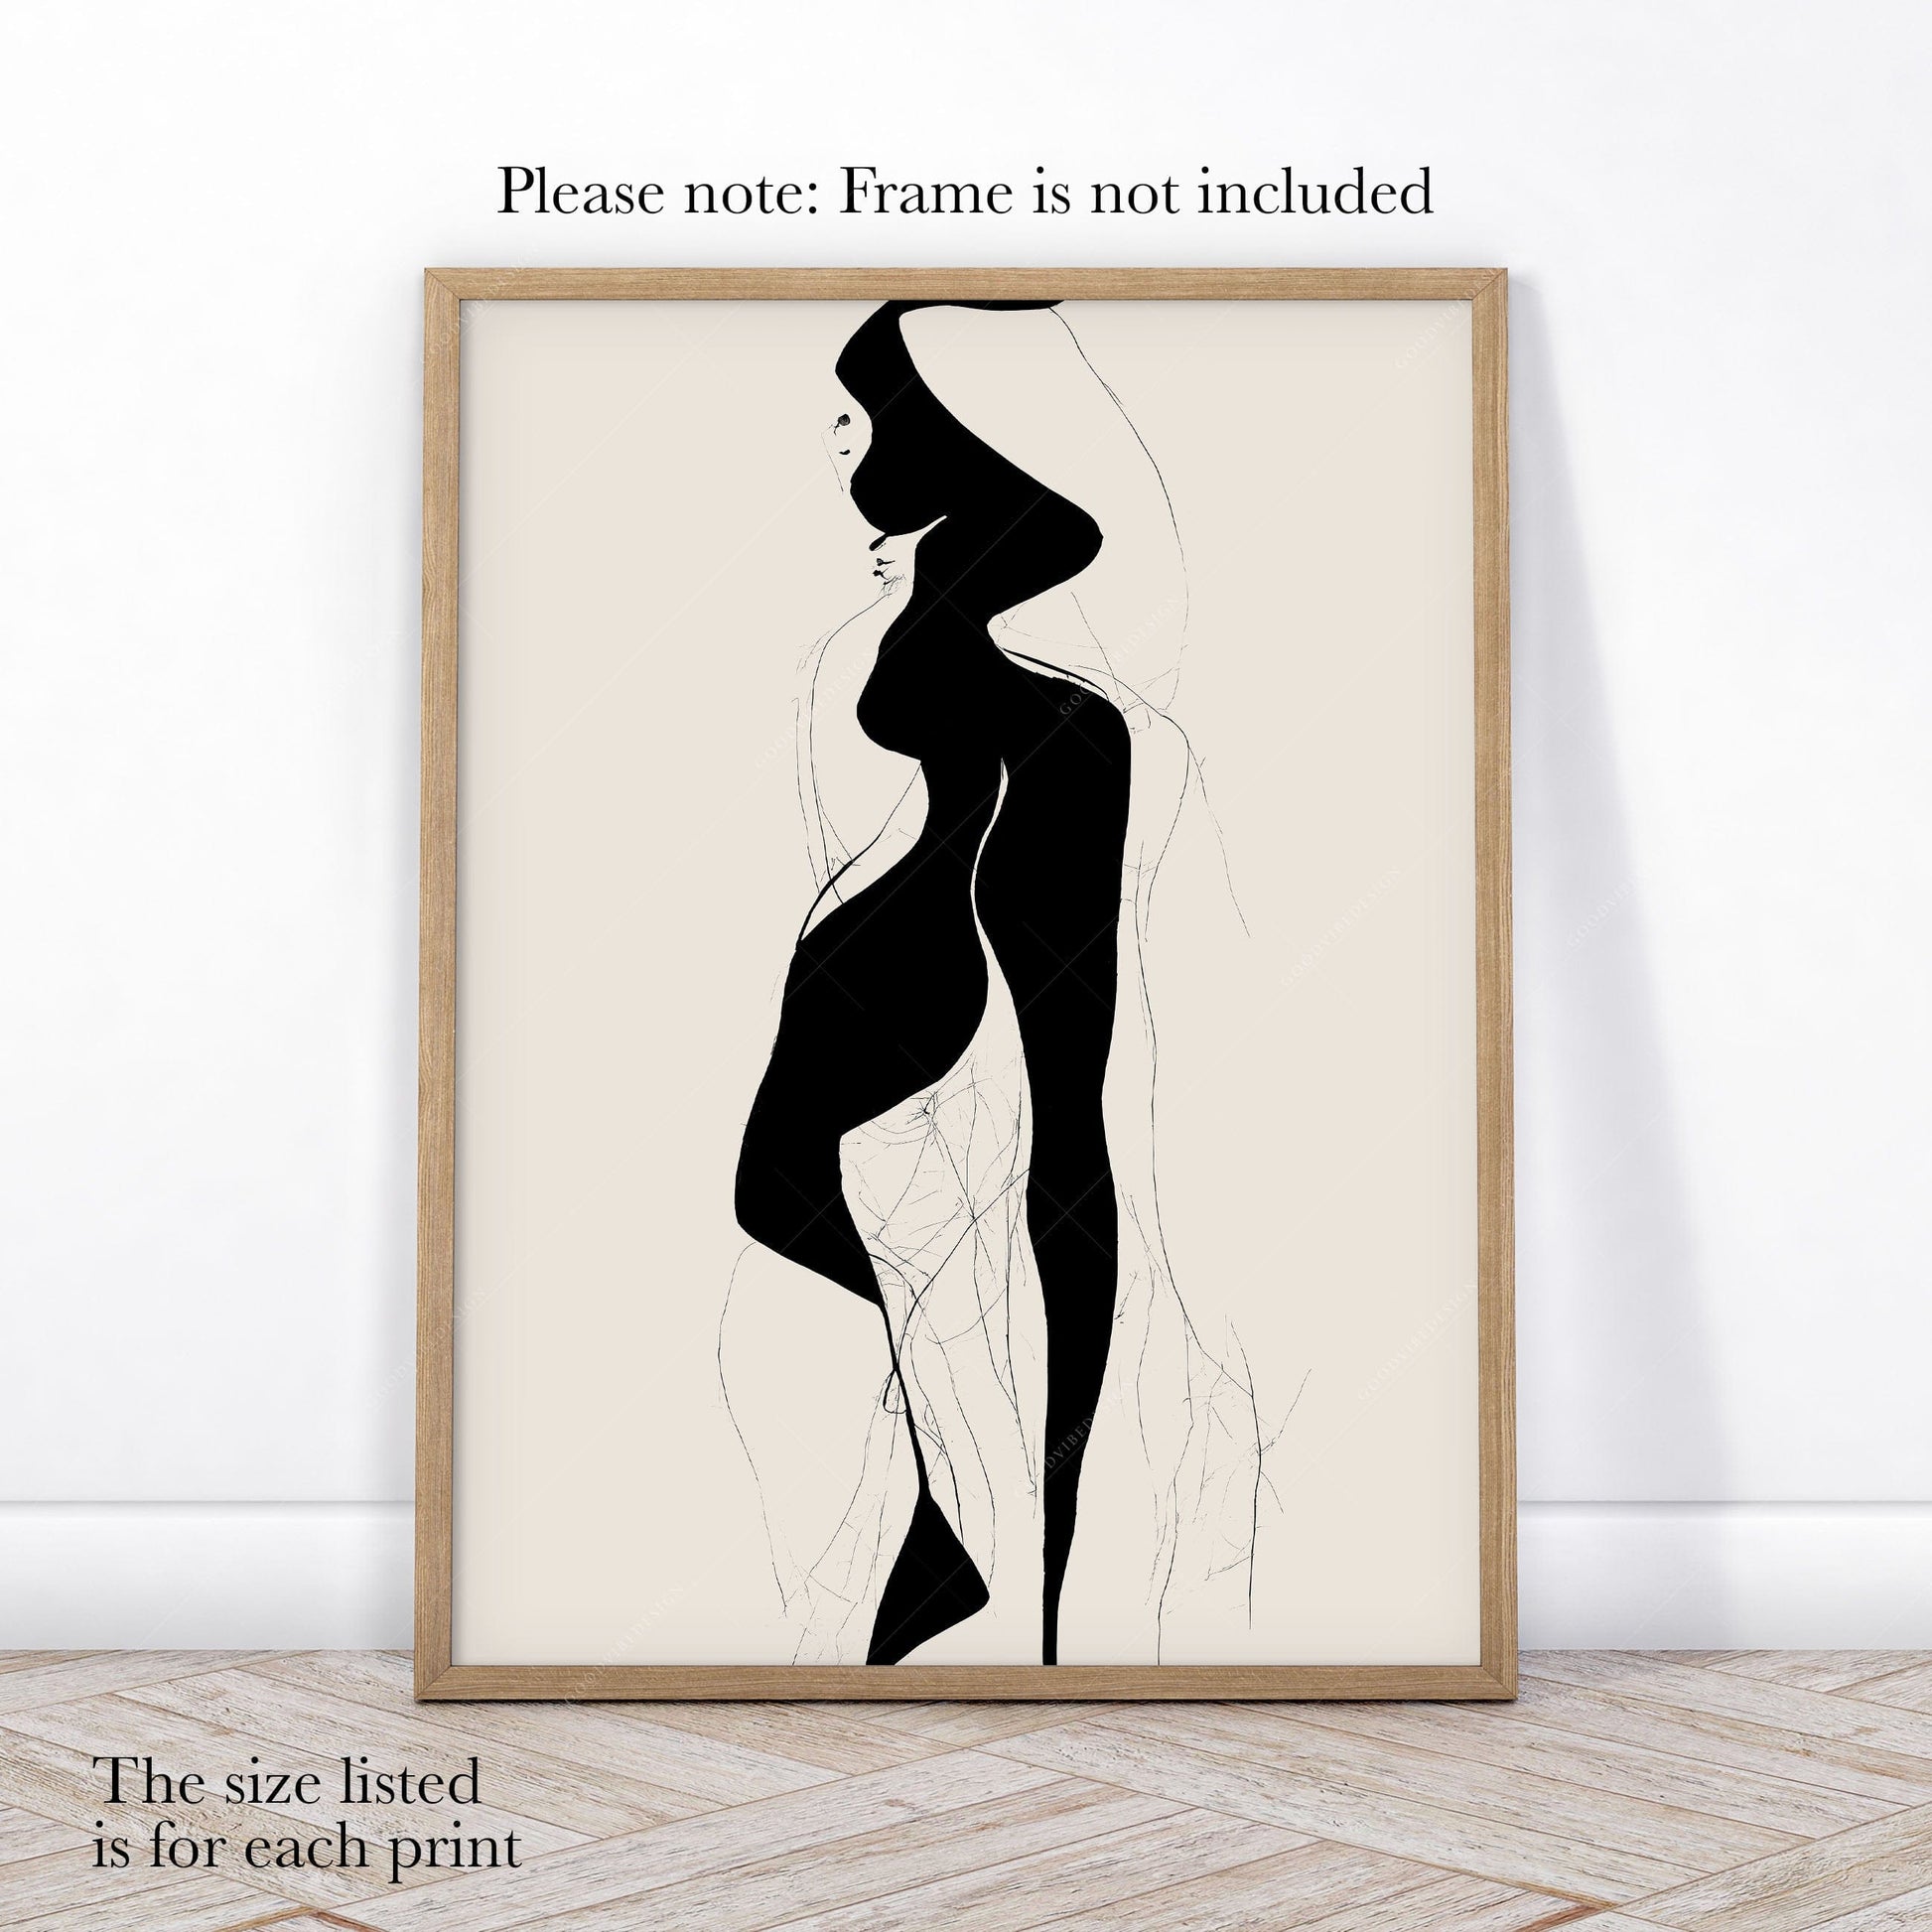 Home Poster Decor Set of 3 Minimalist Gallery Wall, One Line Drawing, Female Body, Set of 3 Print, Modern Home Decor, Bedroom Wall Decor, Above Bar, Living Room Decor